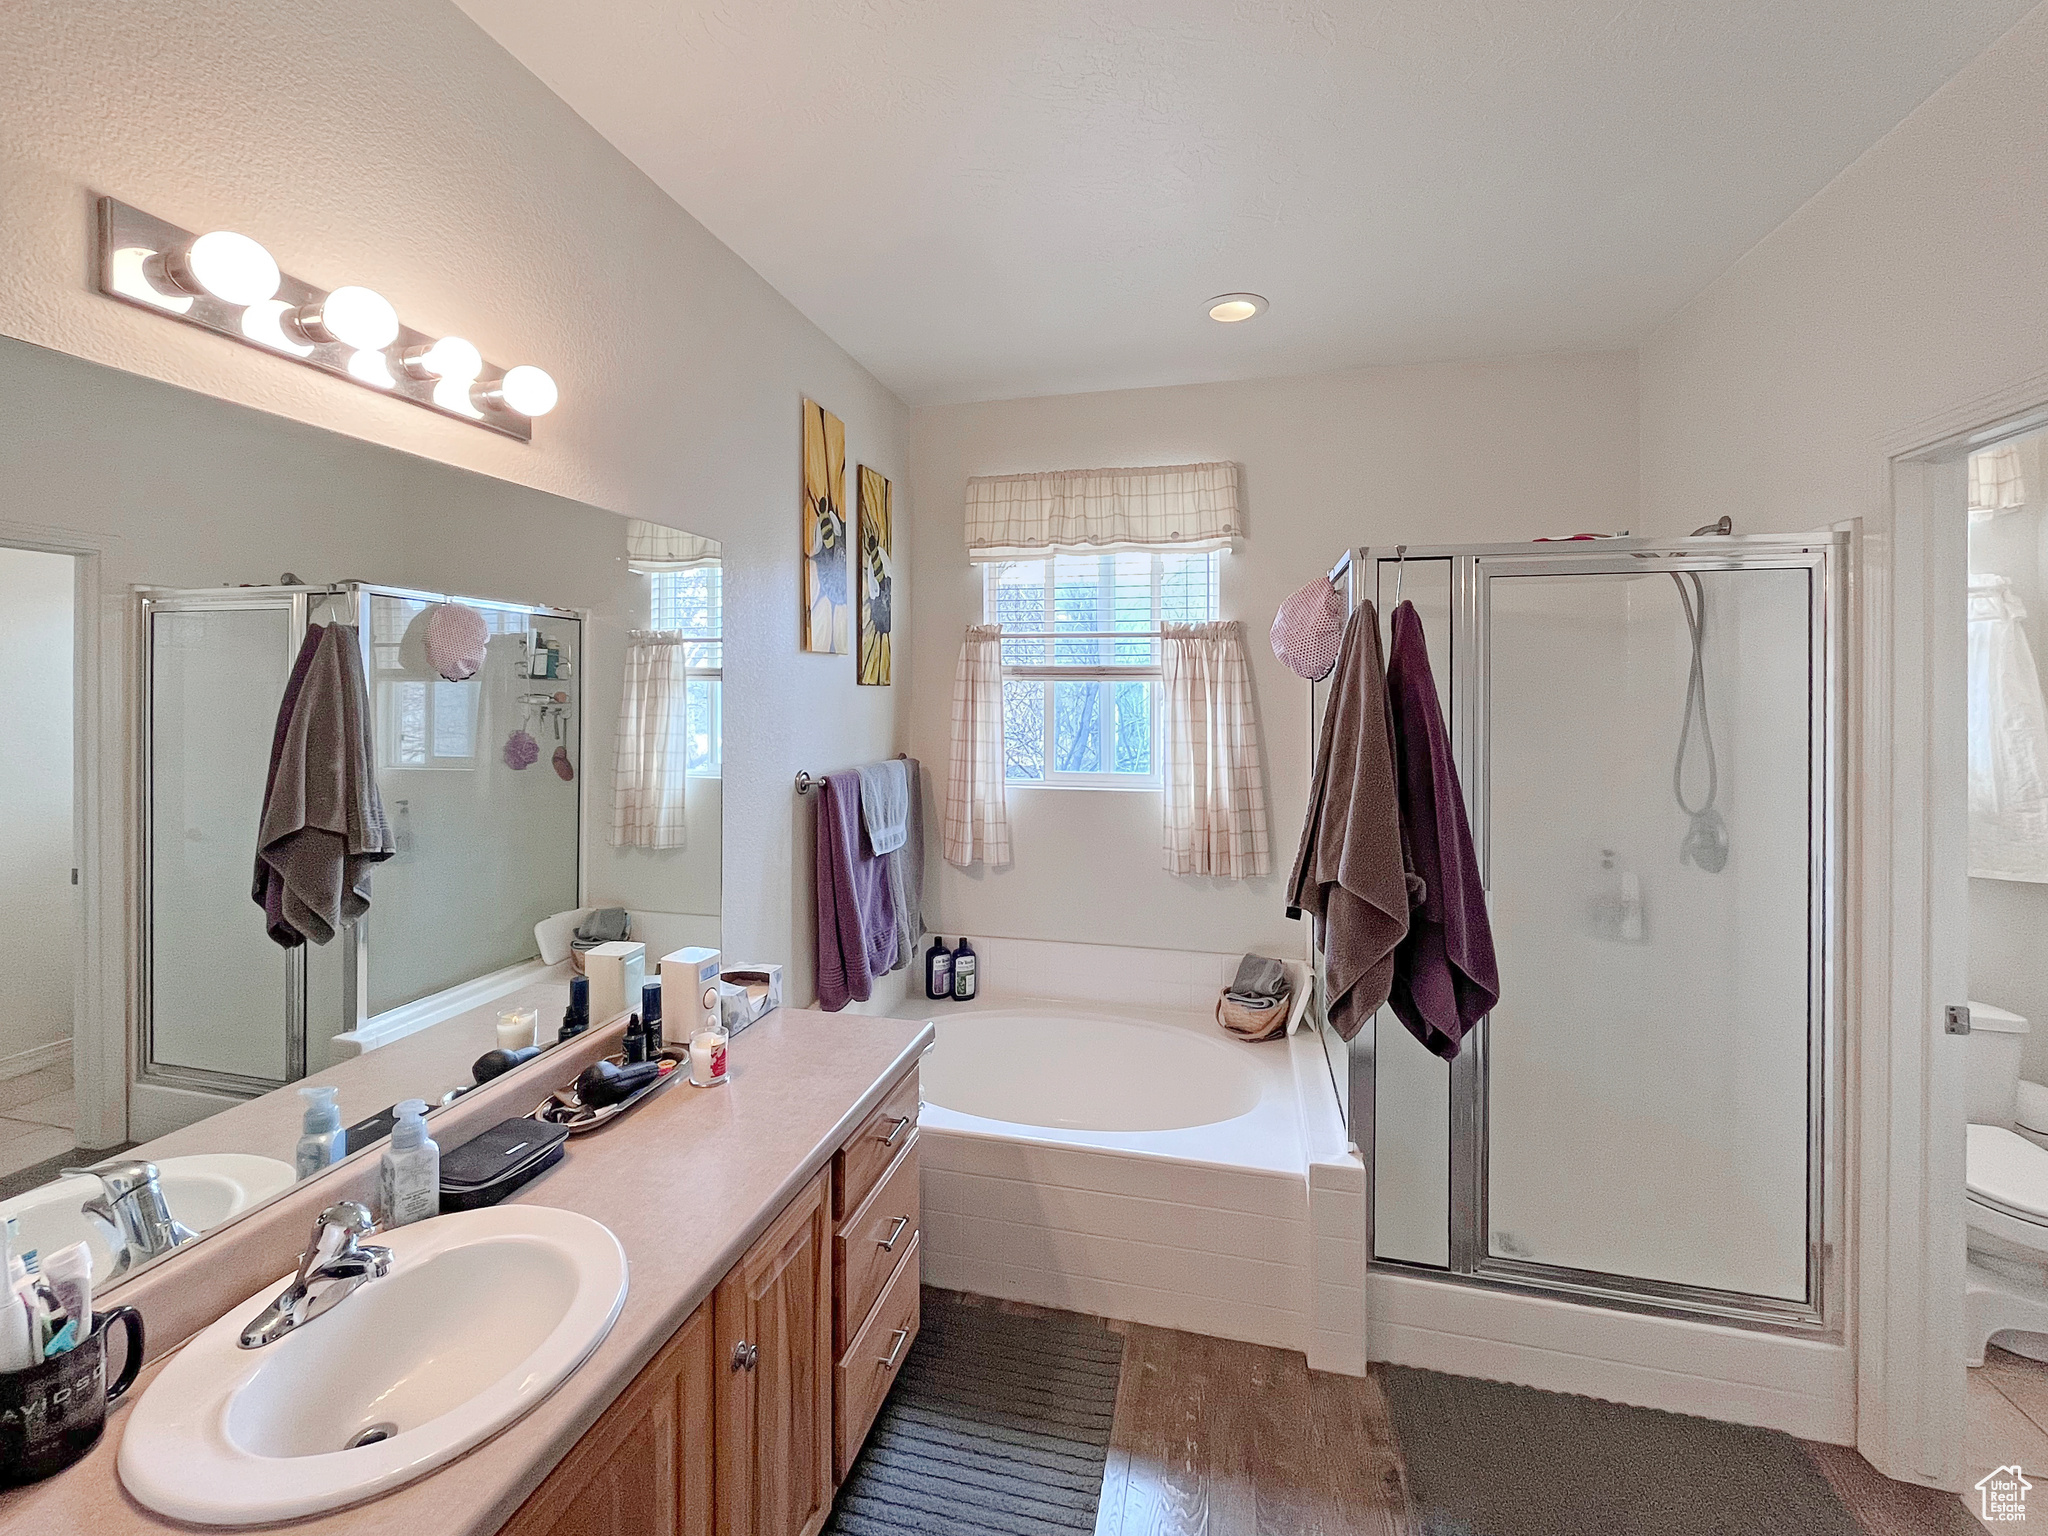 Master Full bathroom featuring a separate toilet room, large tub, plus a walk in shower